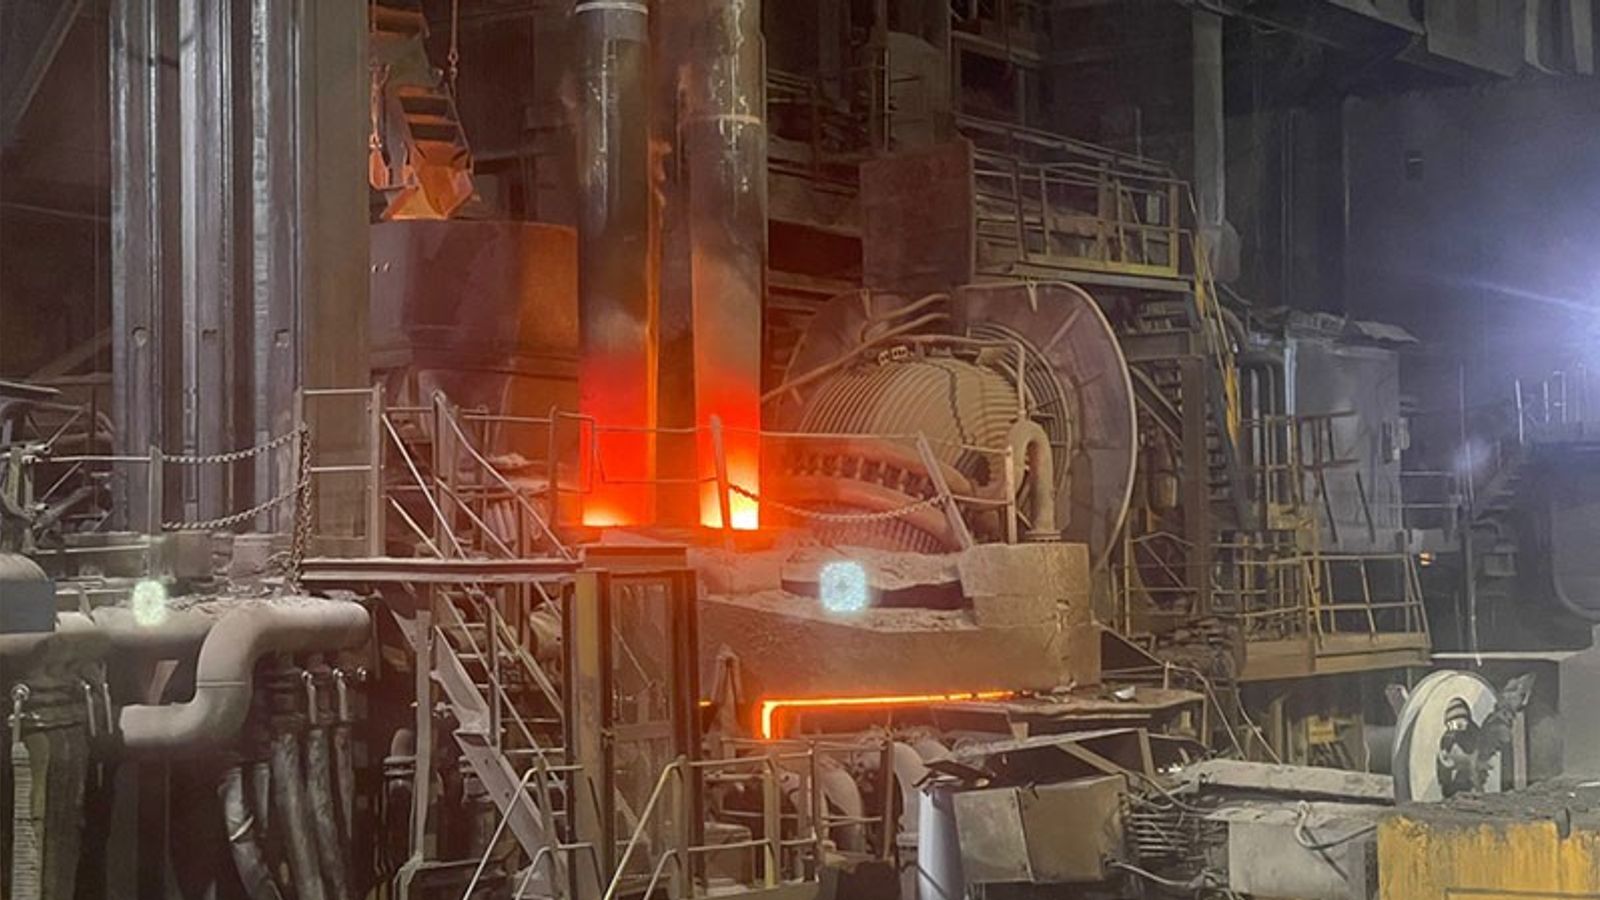 Liberty Steel blames 'unviable' market as restructuring threatens hundreds of jobs